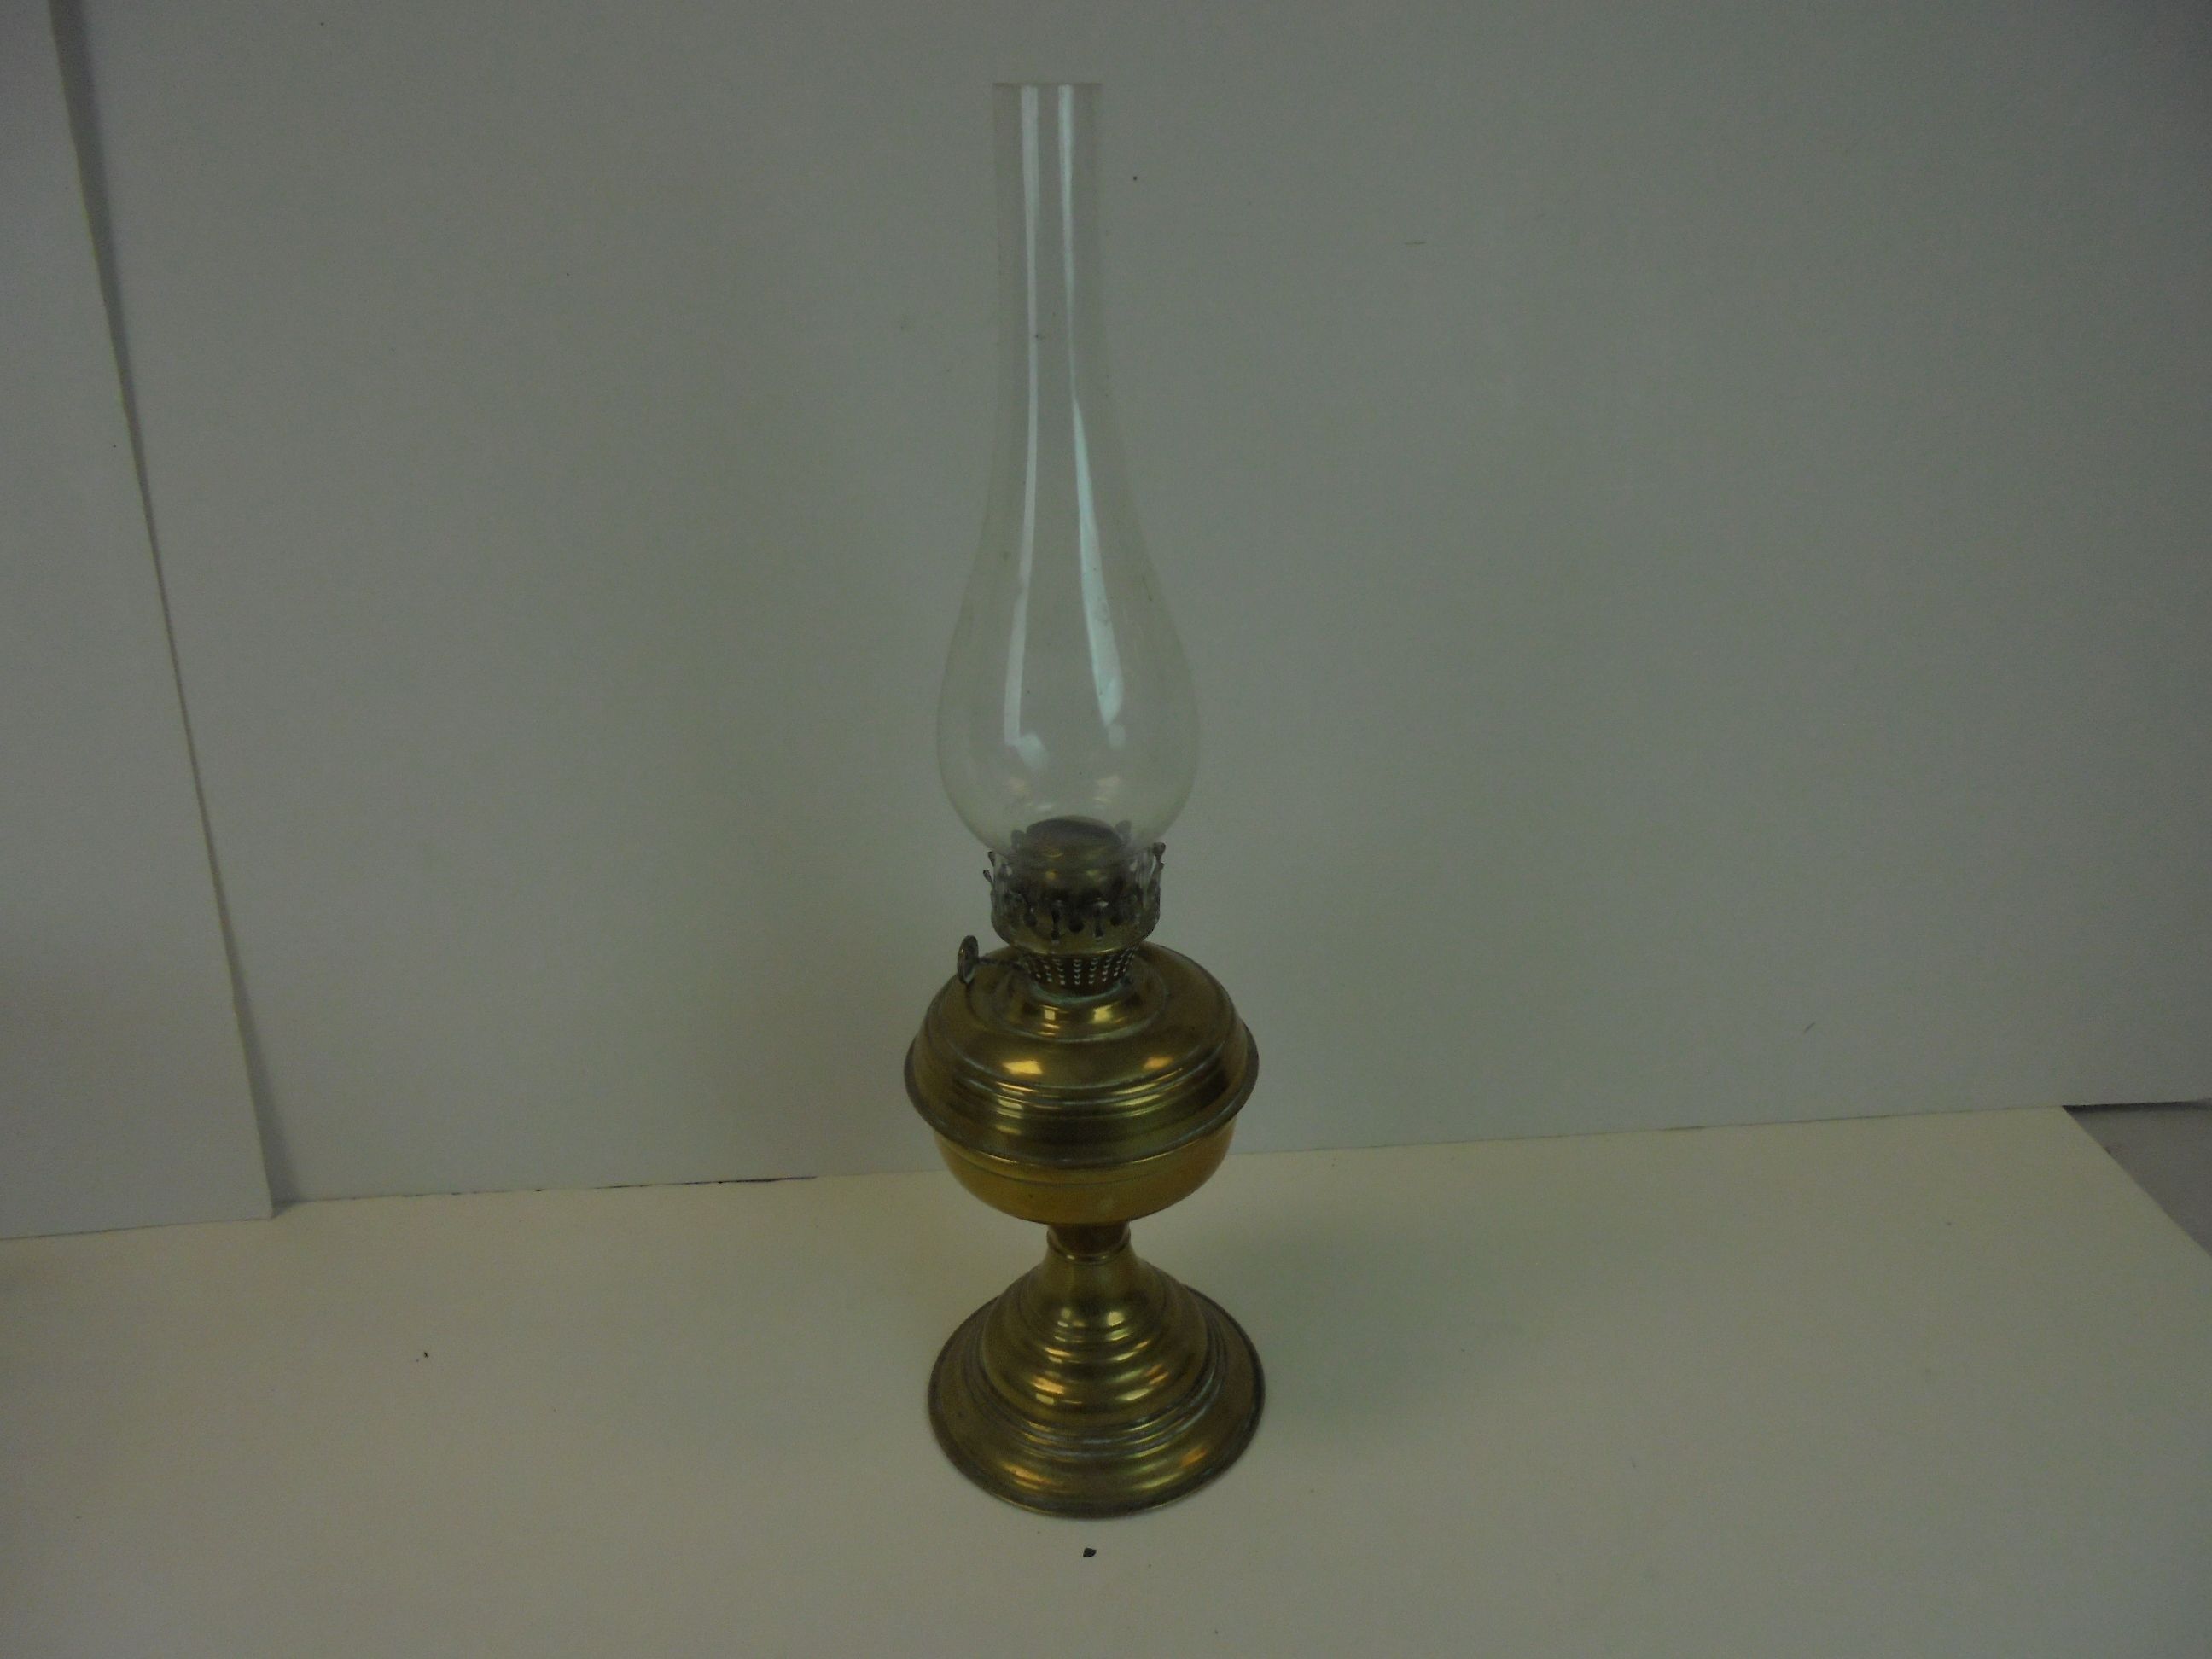 19th century Brass Footman / Trivet together with a Brass Kettle and a Brass Oil Lamp - Image 2 of 5